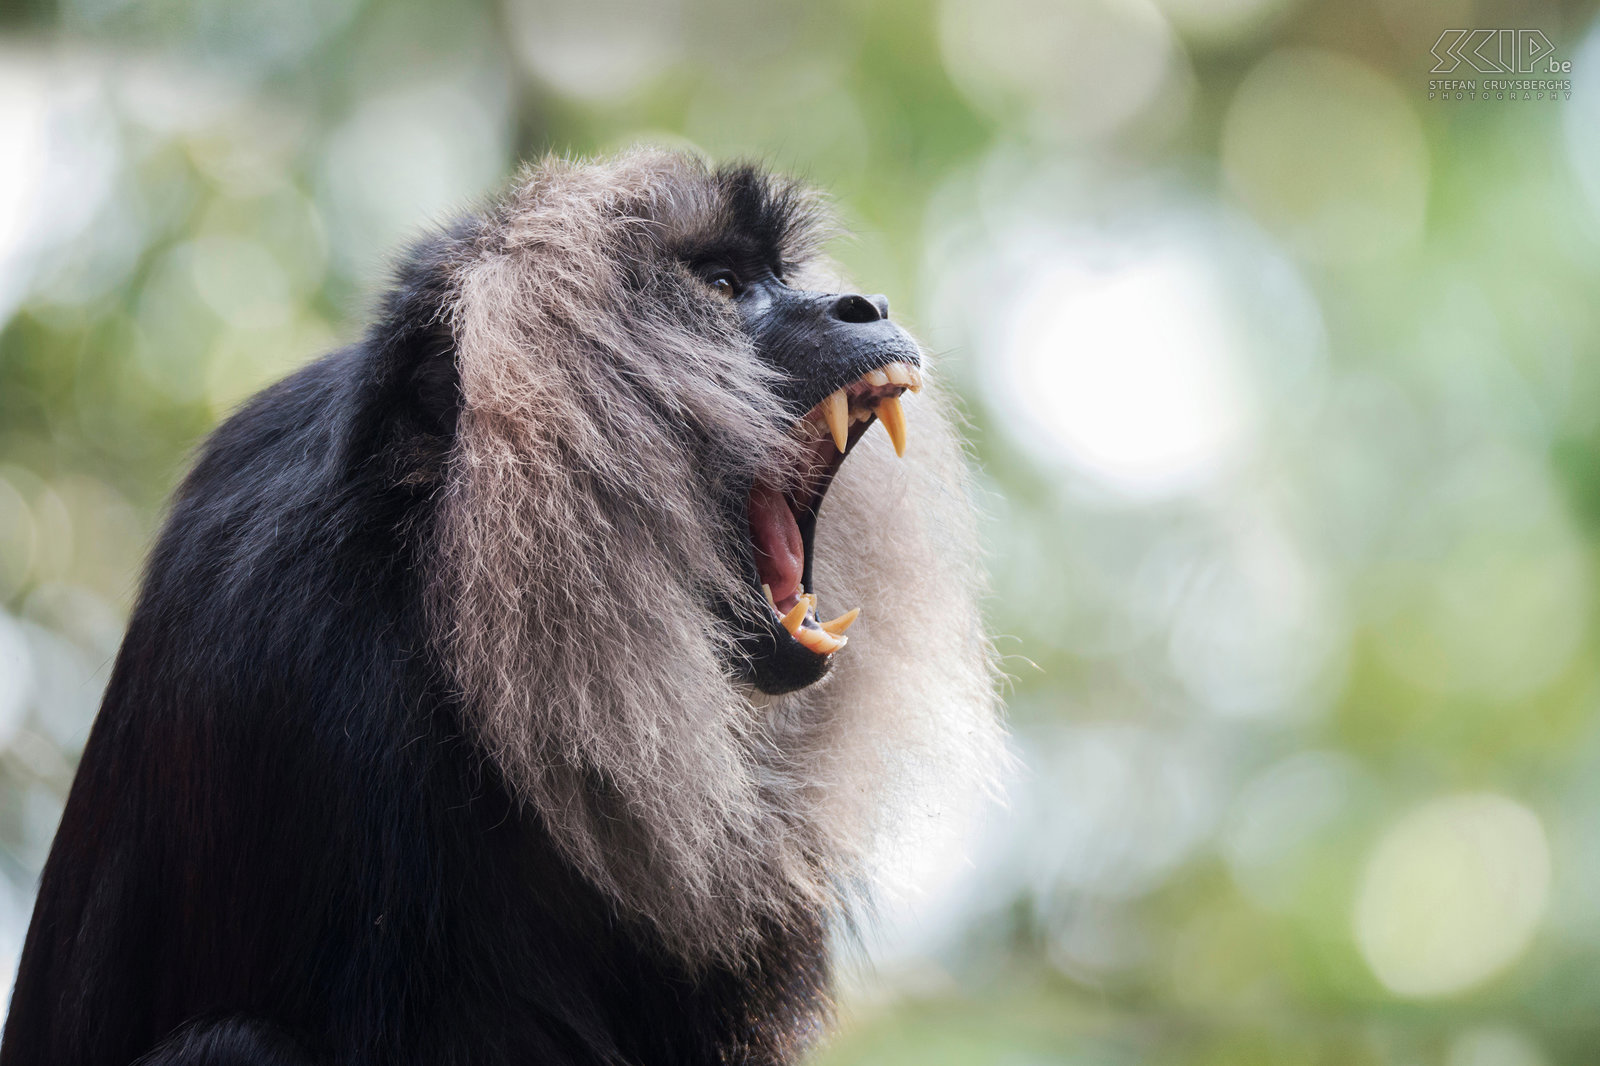 Valparai - Lion-tailed macaque The lion-tailed macaque is one of the most threatened primates and it is estimated that there are only 3000 to 3500 animals in the wild. Stefan Cruysberghs